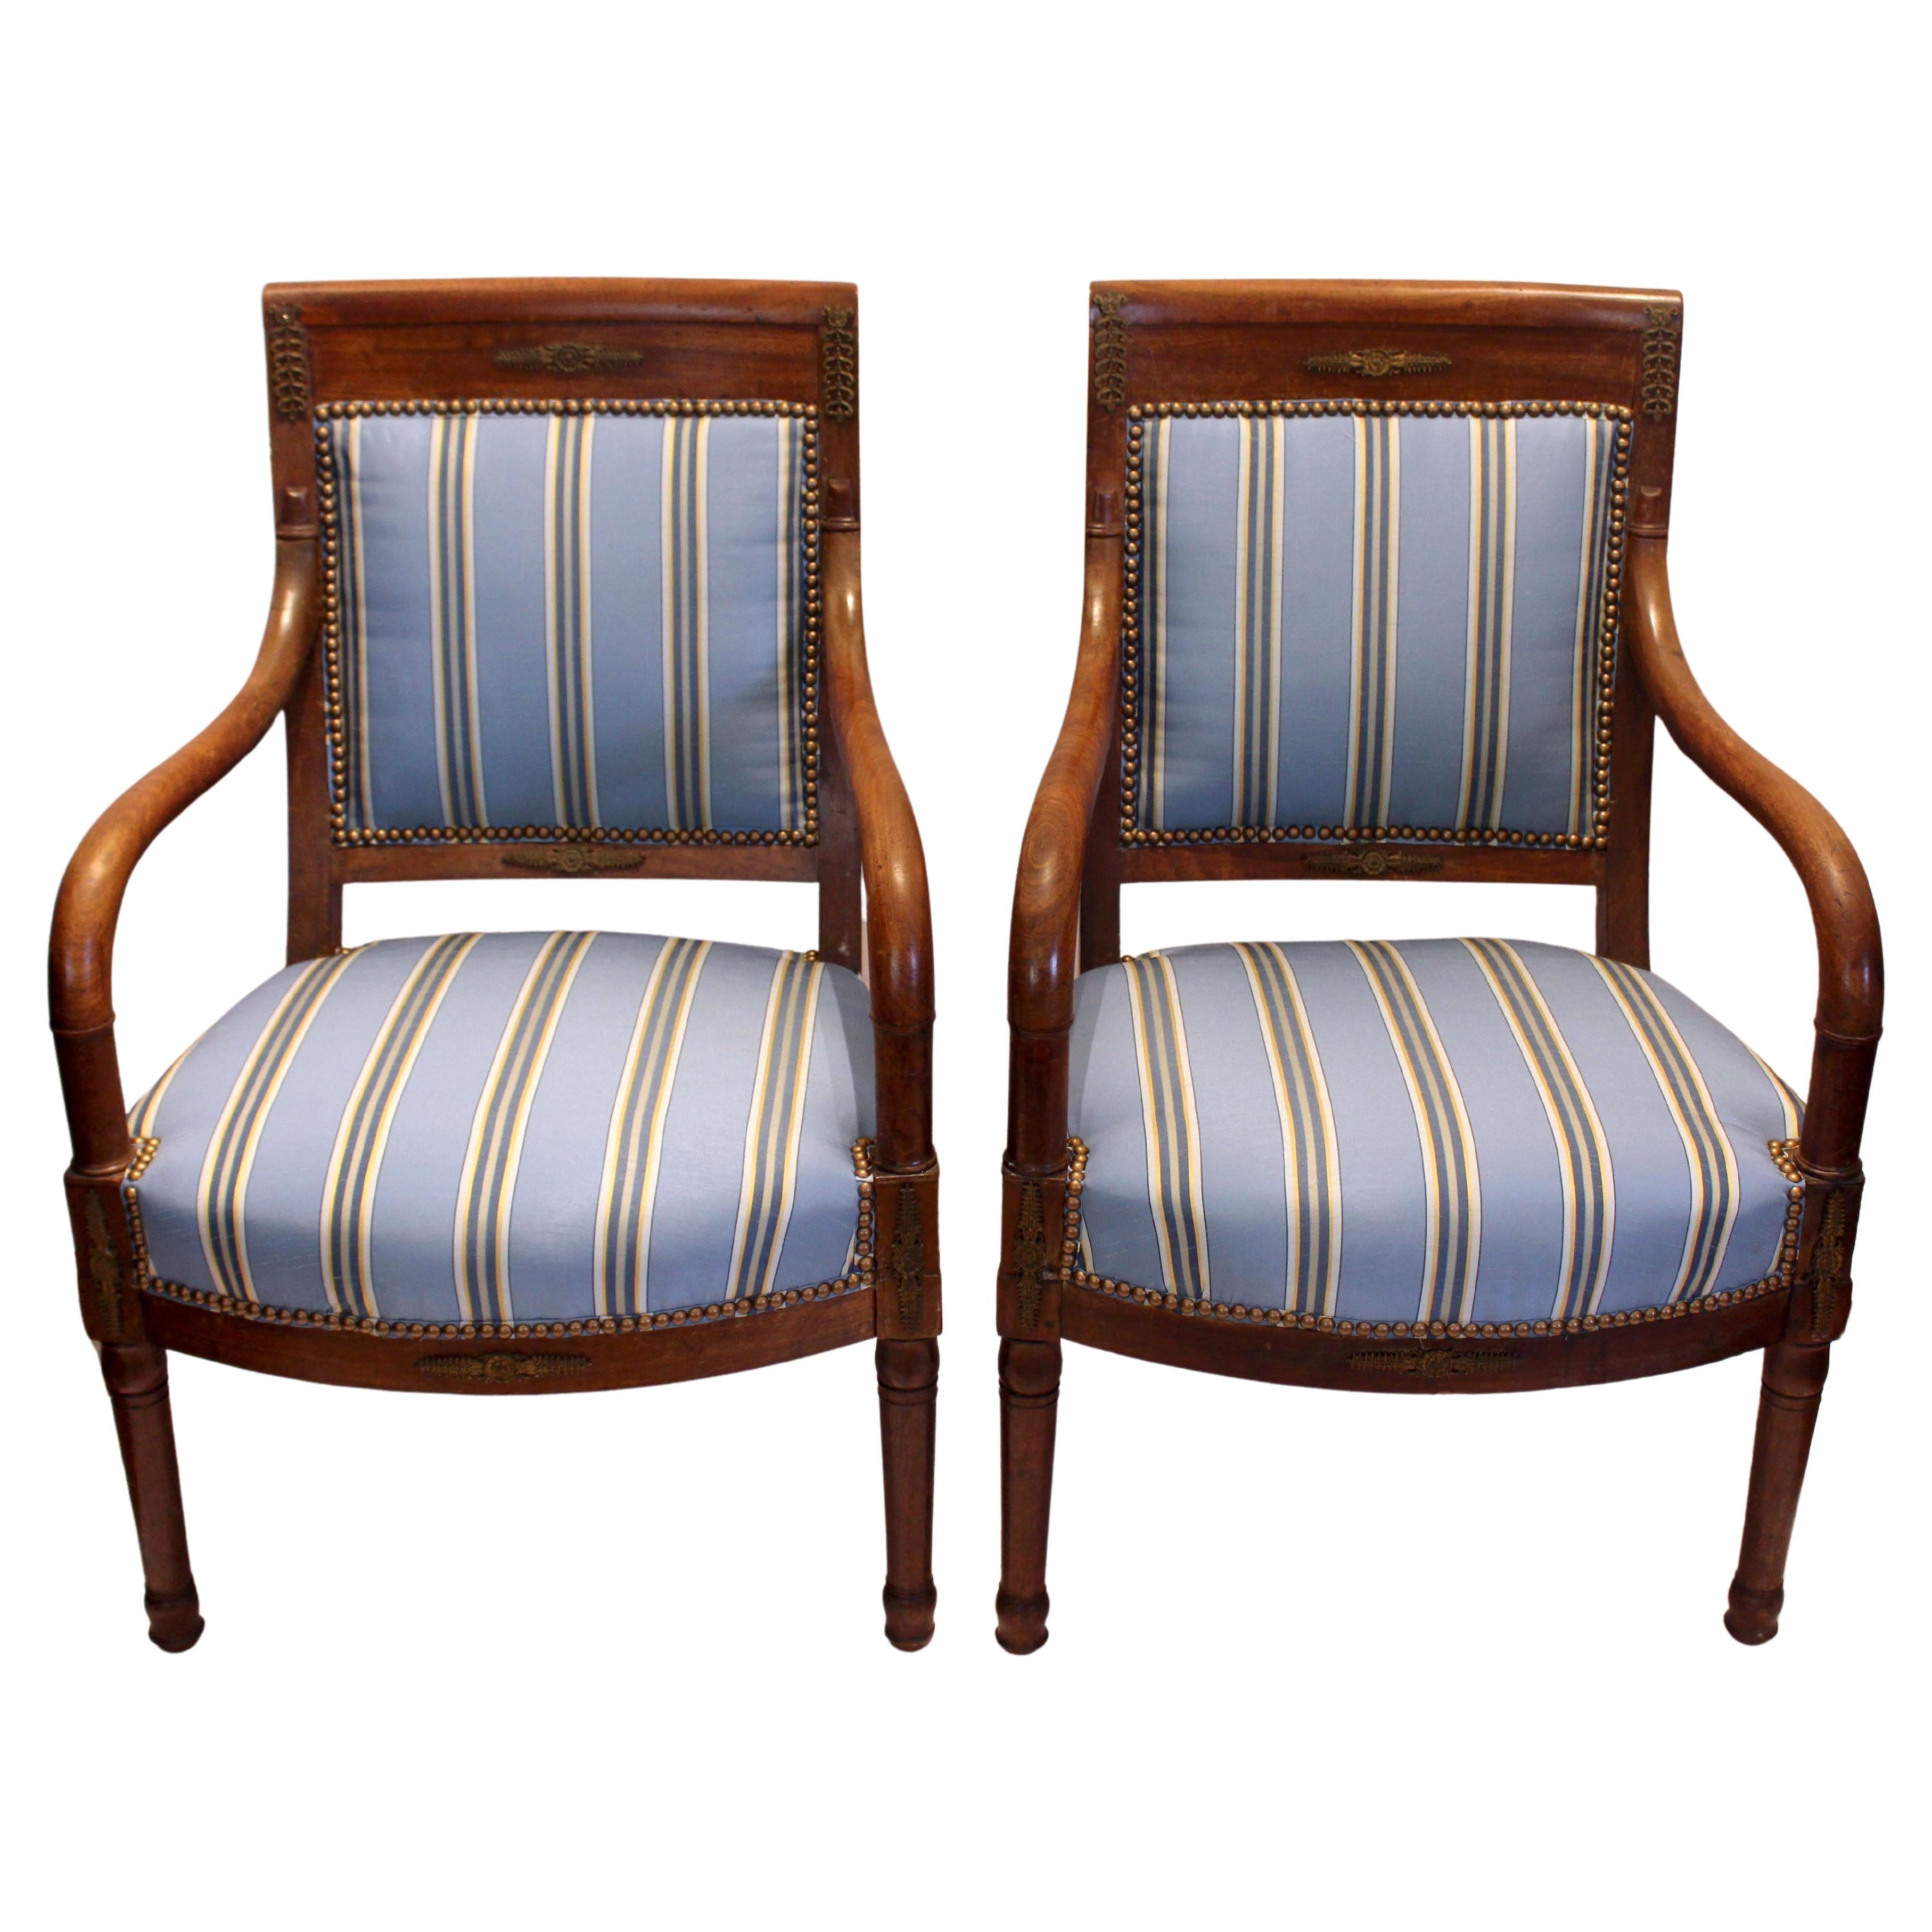 Circa 1800-1815 Pair of Fauteuils or Open Arm Chairs, French